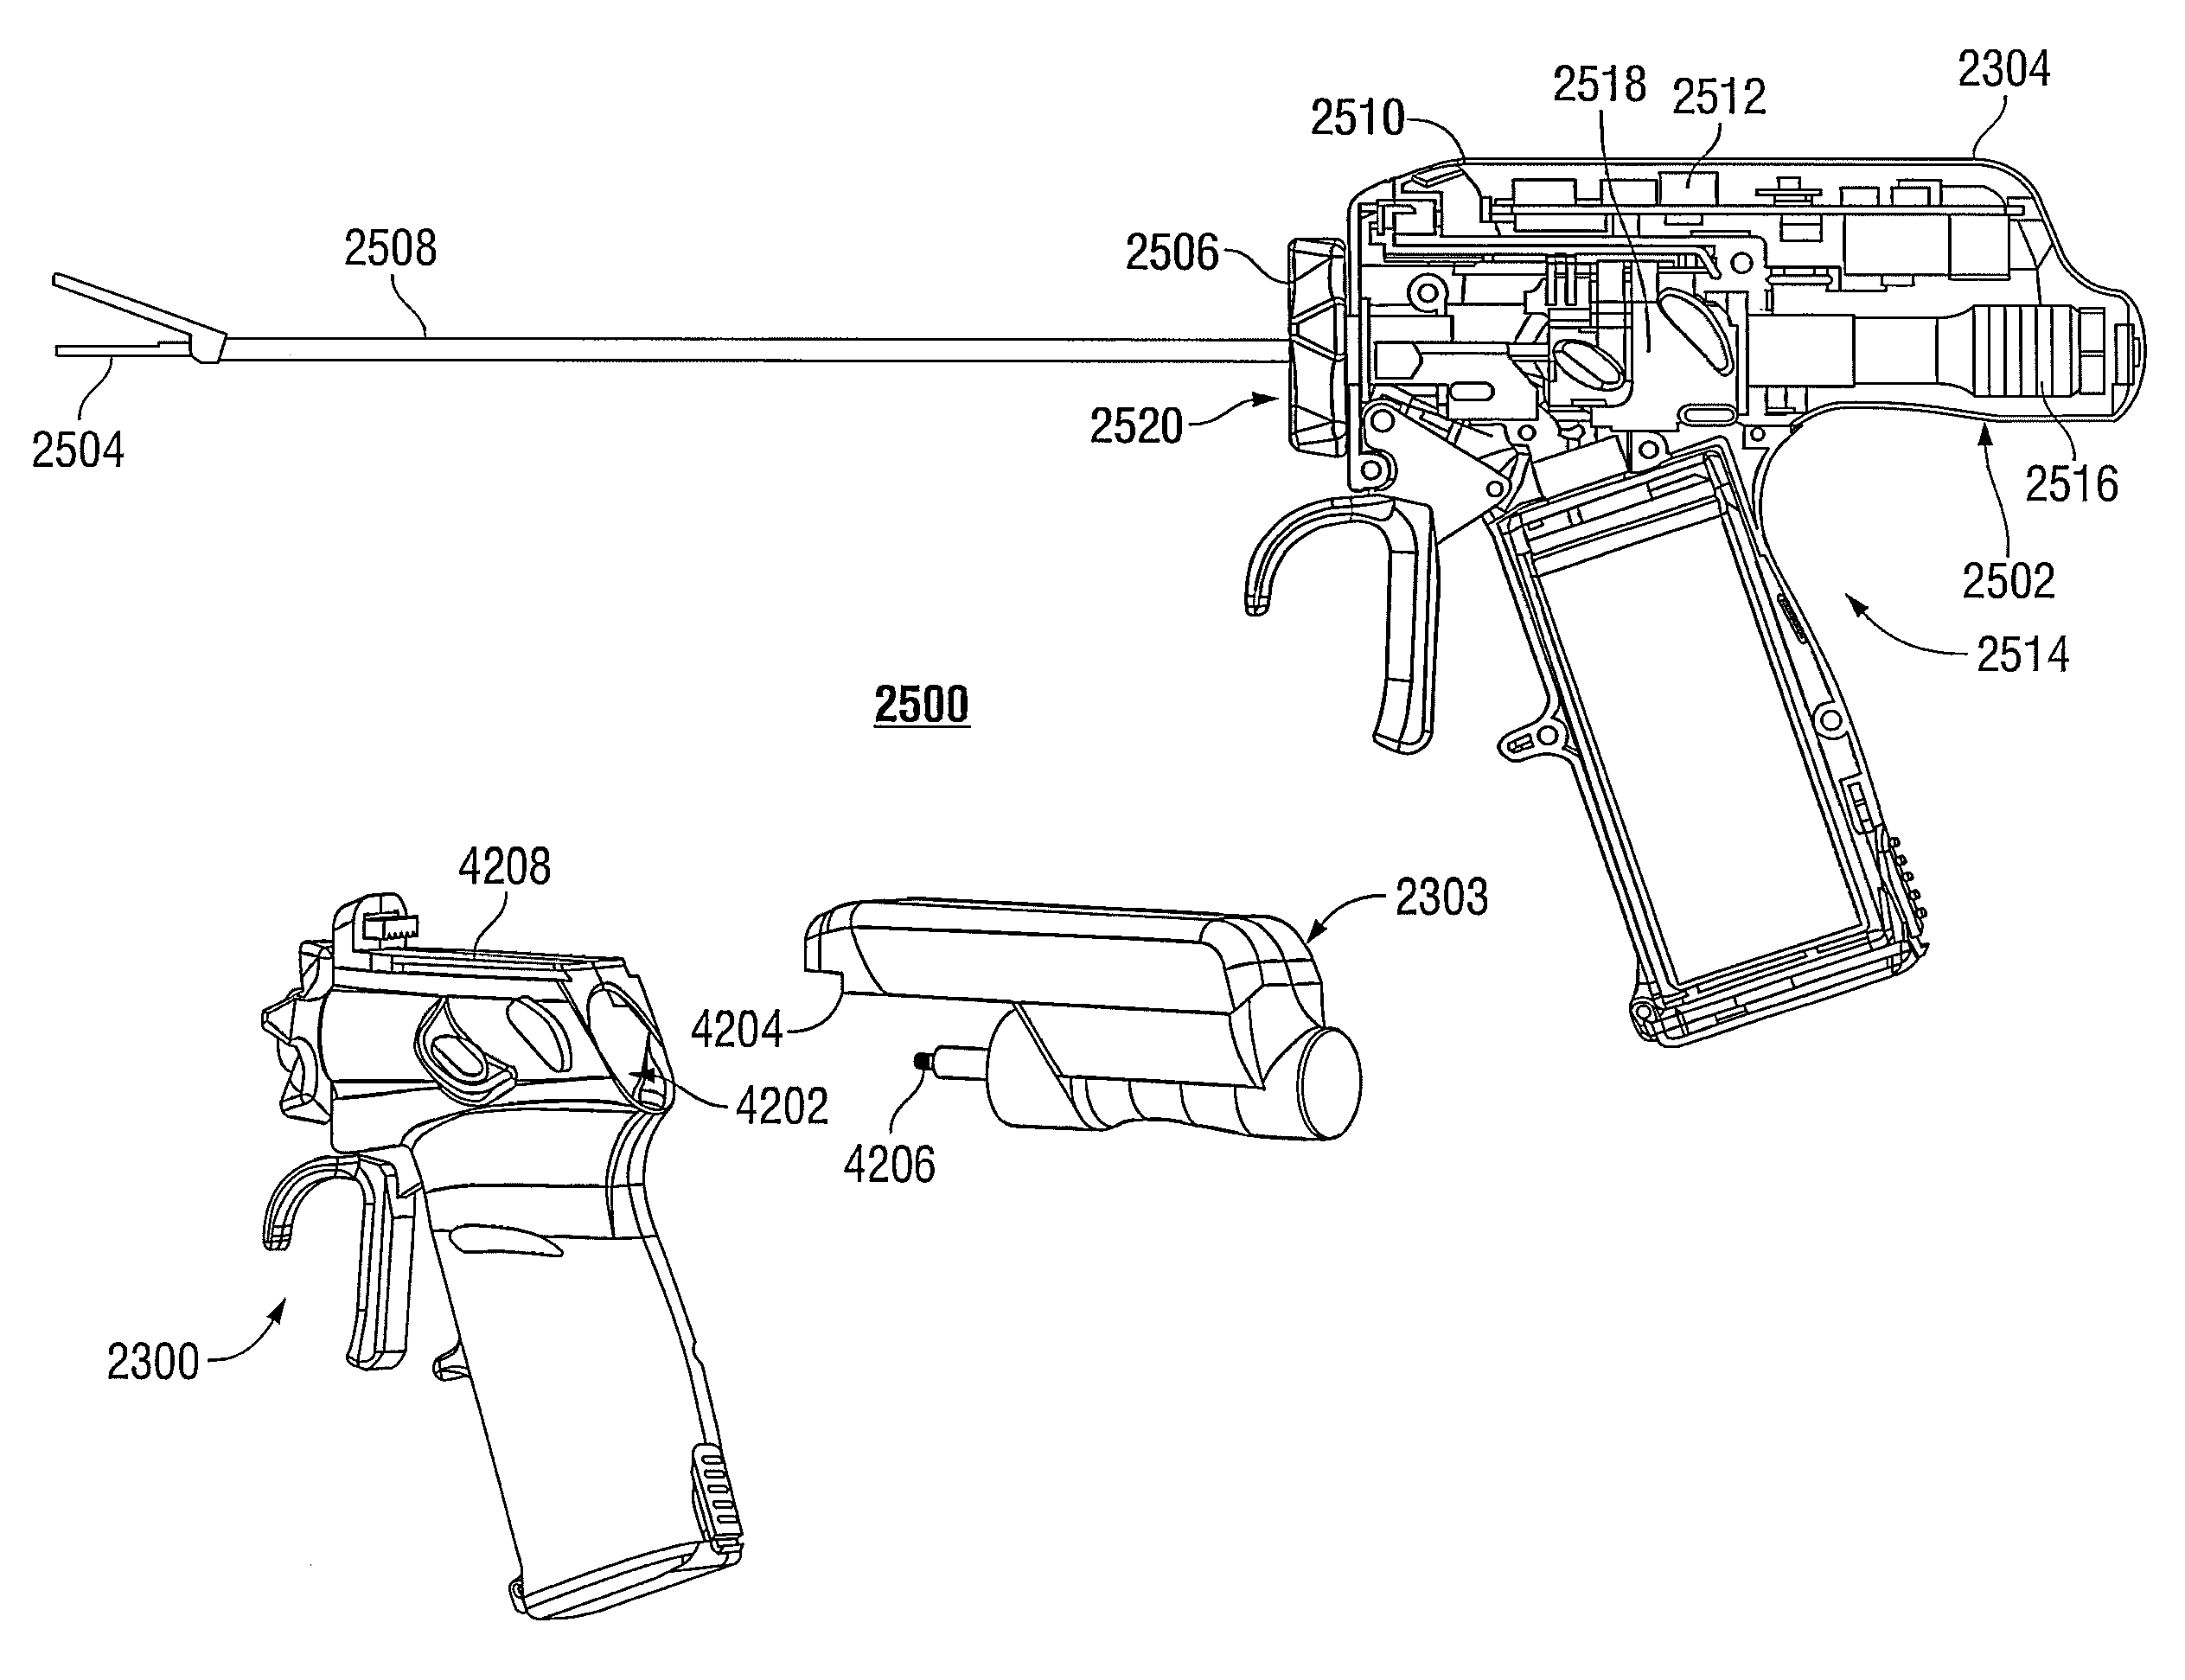 Cordless hand-held ultrasonic cautery cutting device and method